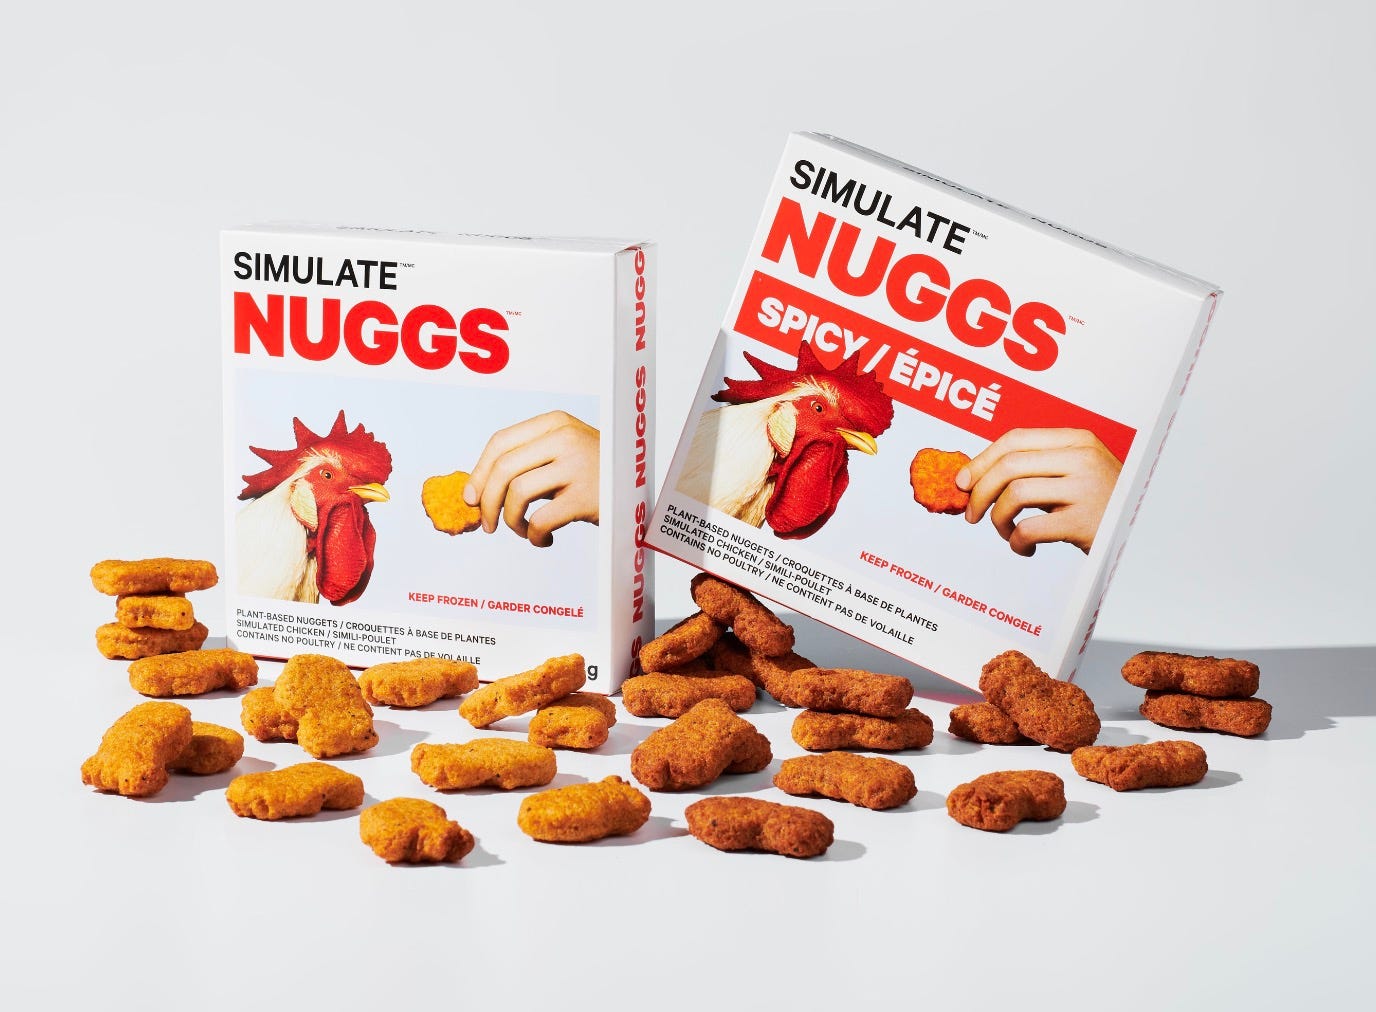 Nuggs is trying to be brave at shelf » strategy